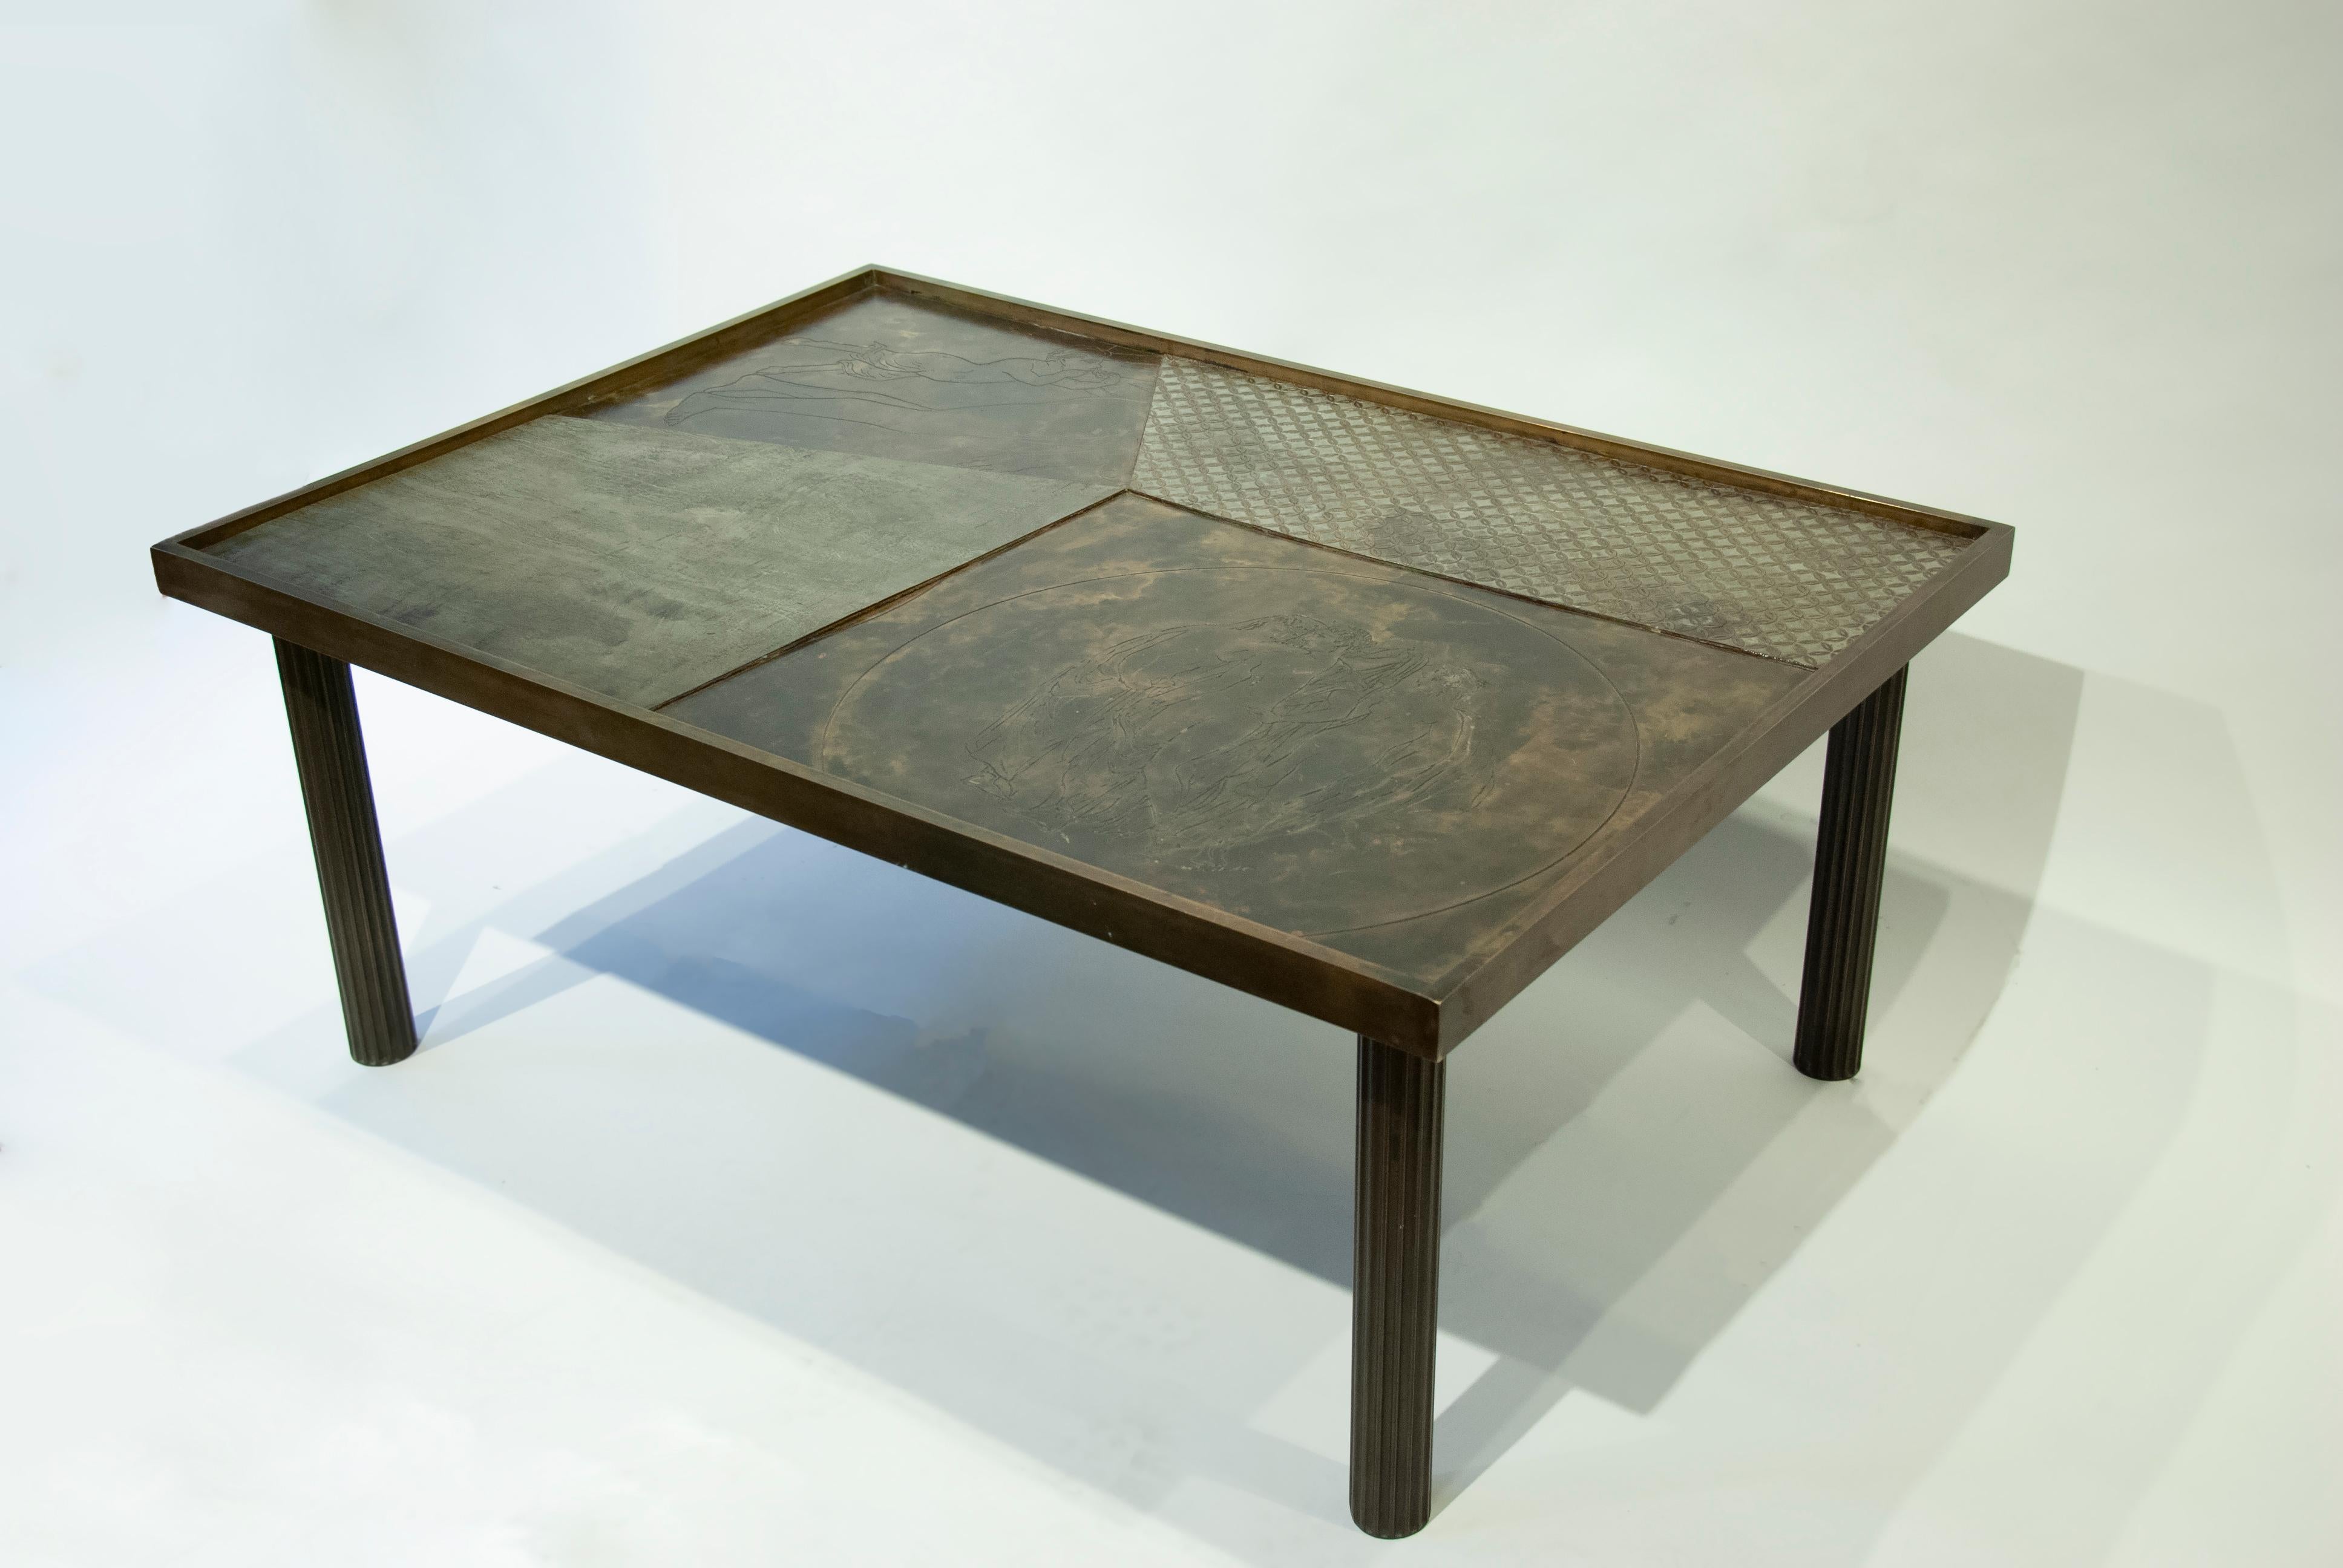 Philip and Kelvin Laverne

Hellenic Memories coffee table
Bronze, pewter and enamel, circa 1960
Measures: 17 1/4” H x 42” L x 30” W
(43.8cm x 106.7cm x 76.2cm)

Philip and Kelvin LaVerne are an American collaborative-design father and son